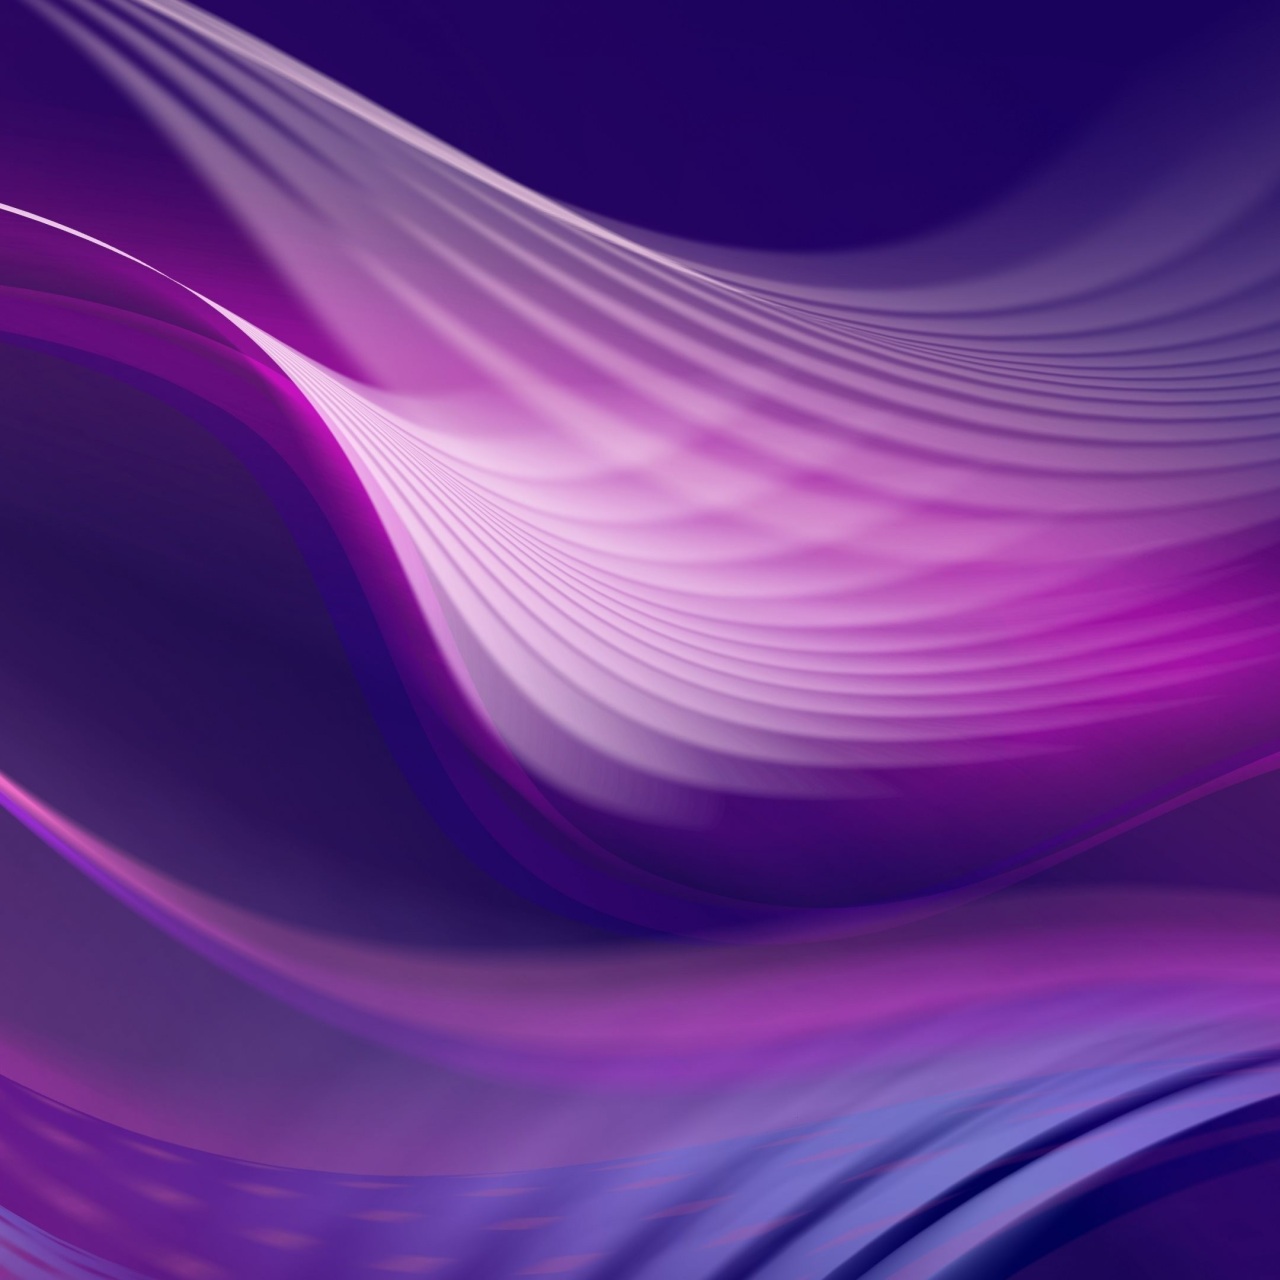 Color Waves Abstract - 4k Wallpapers - 40.000+ ipad wallpapers 4k - 4k ...